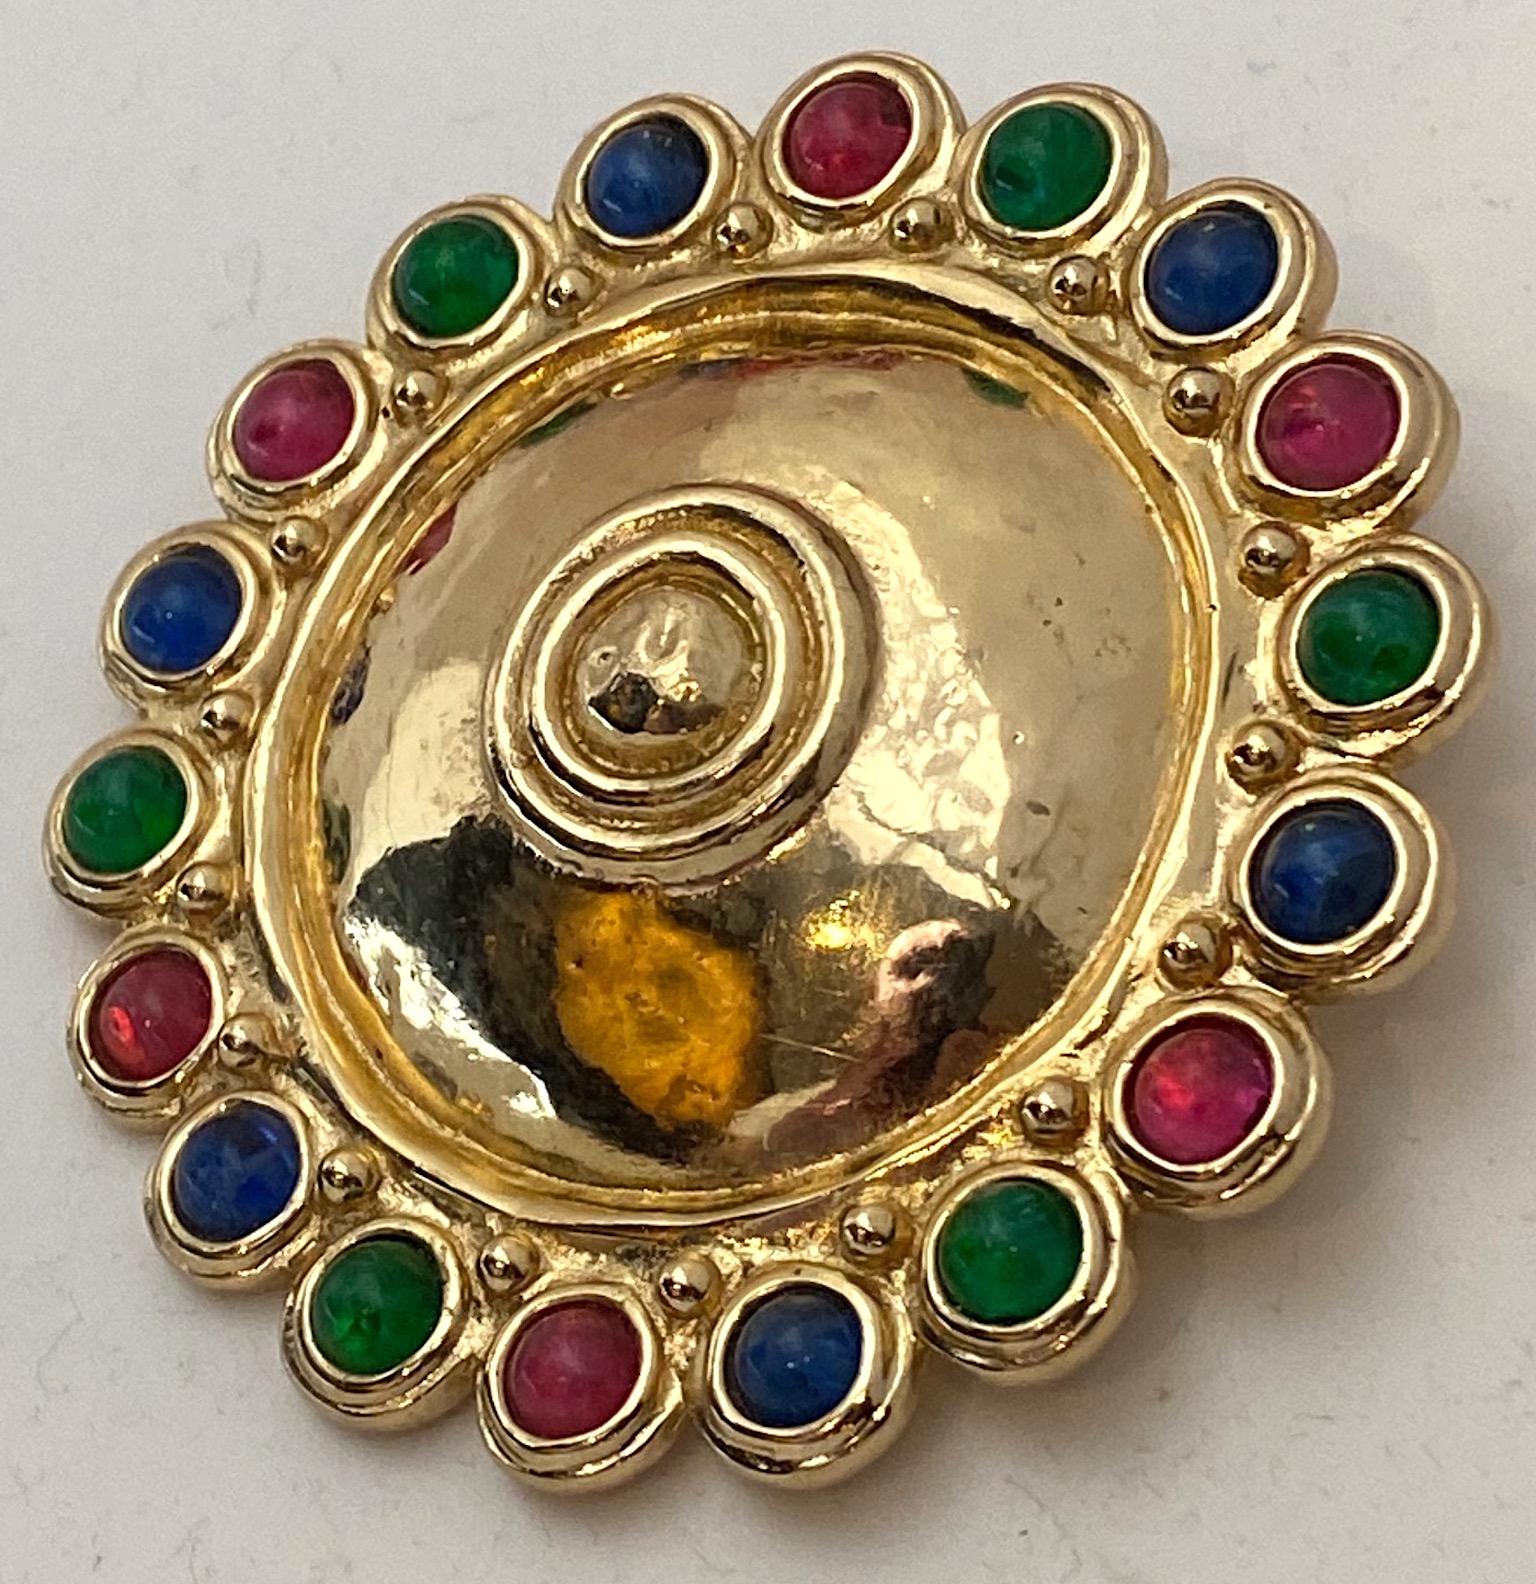 A beautiful and large Christian Dior medallion brooch in the Etruscan style. The pin is lightly domed in the center with a polished martele' texture and bordered with red, green and blue glass cabochons along the edge. The gold plate is shiny and in